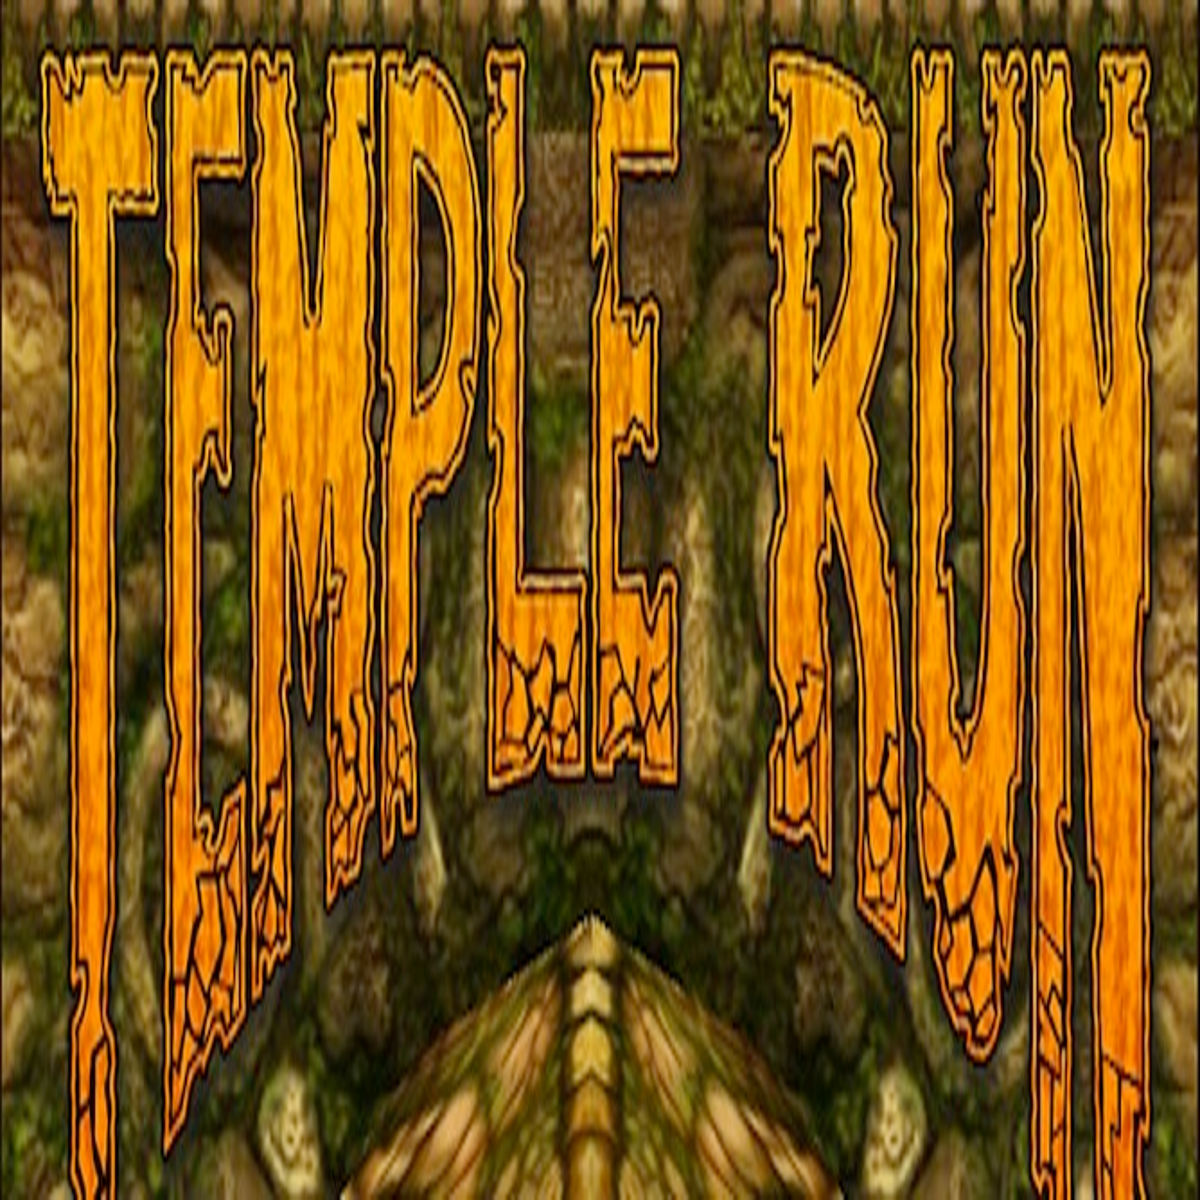 Temple Run has been downloaded over 100 million times - MobileSyrup